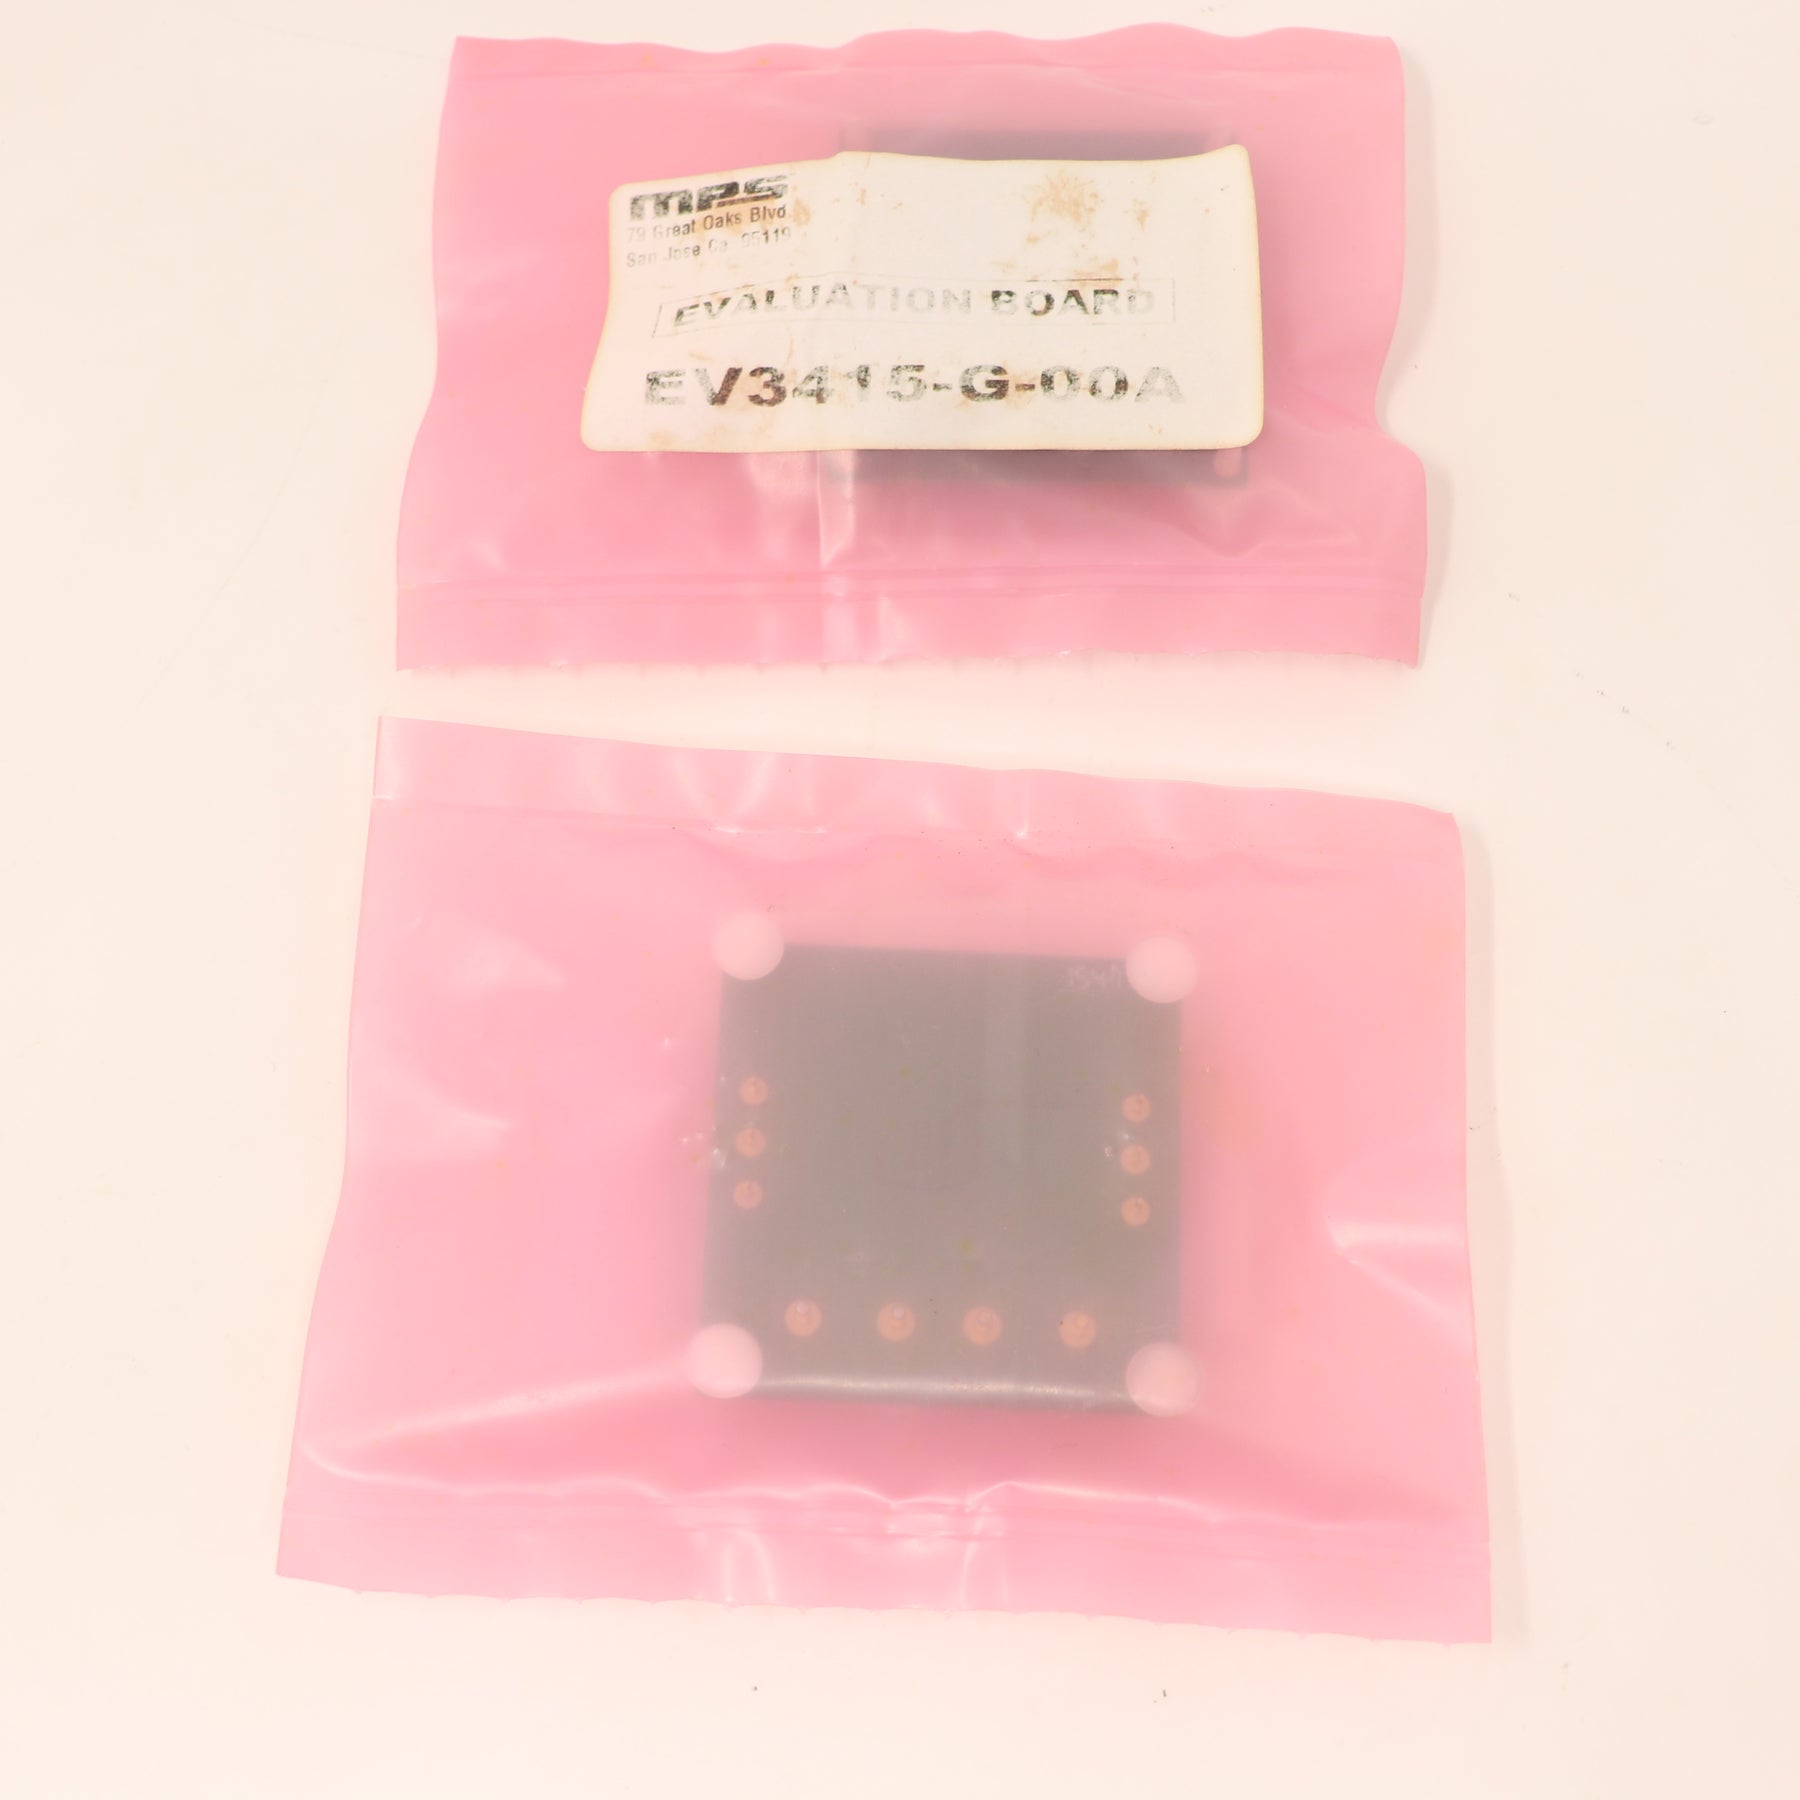 [UPD] (2) MPS EV3415-G-00A Power Management IC Development Tools Evaluation Board for MP3415